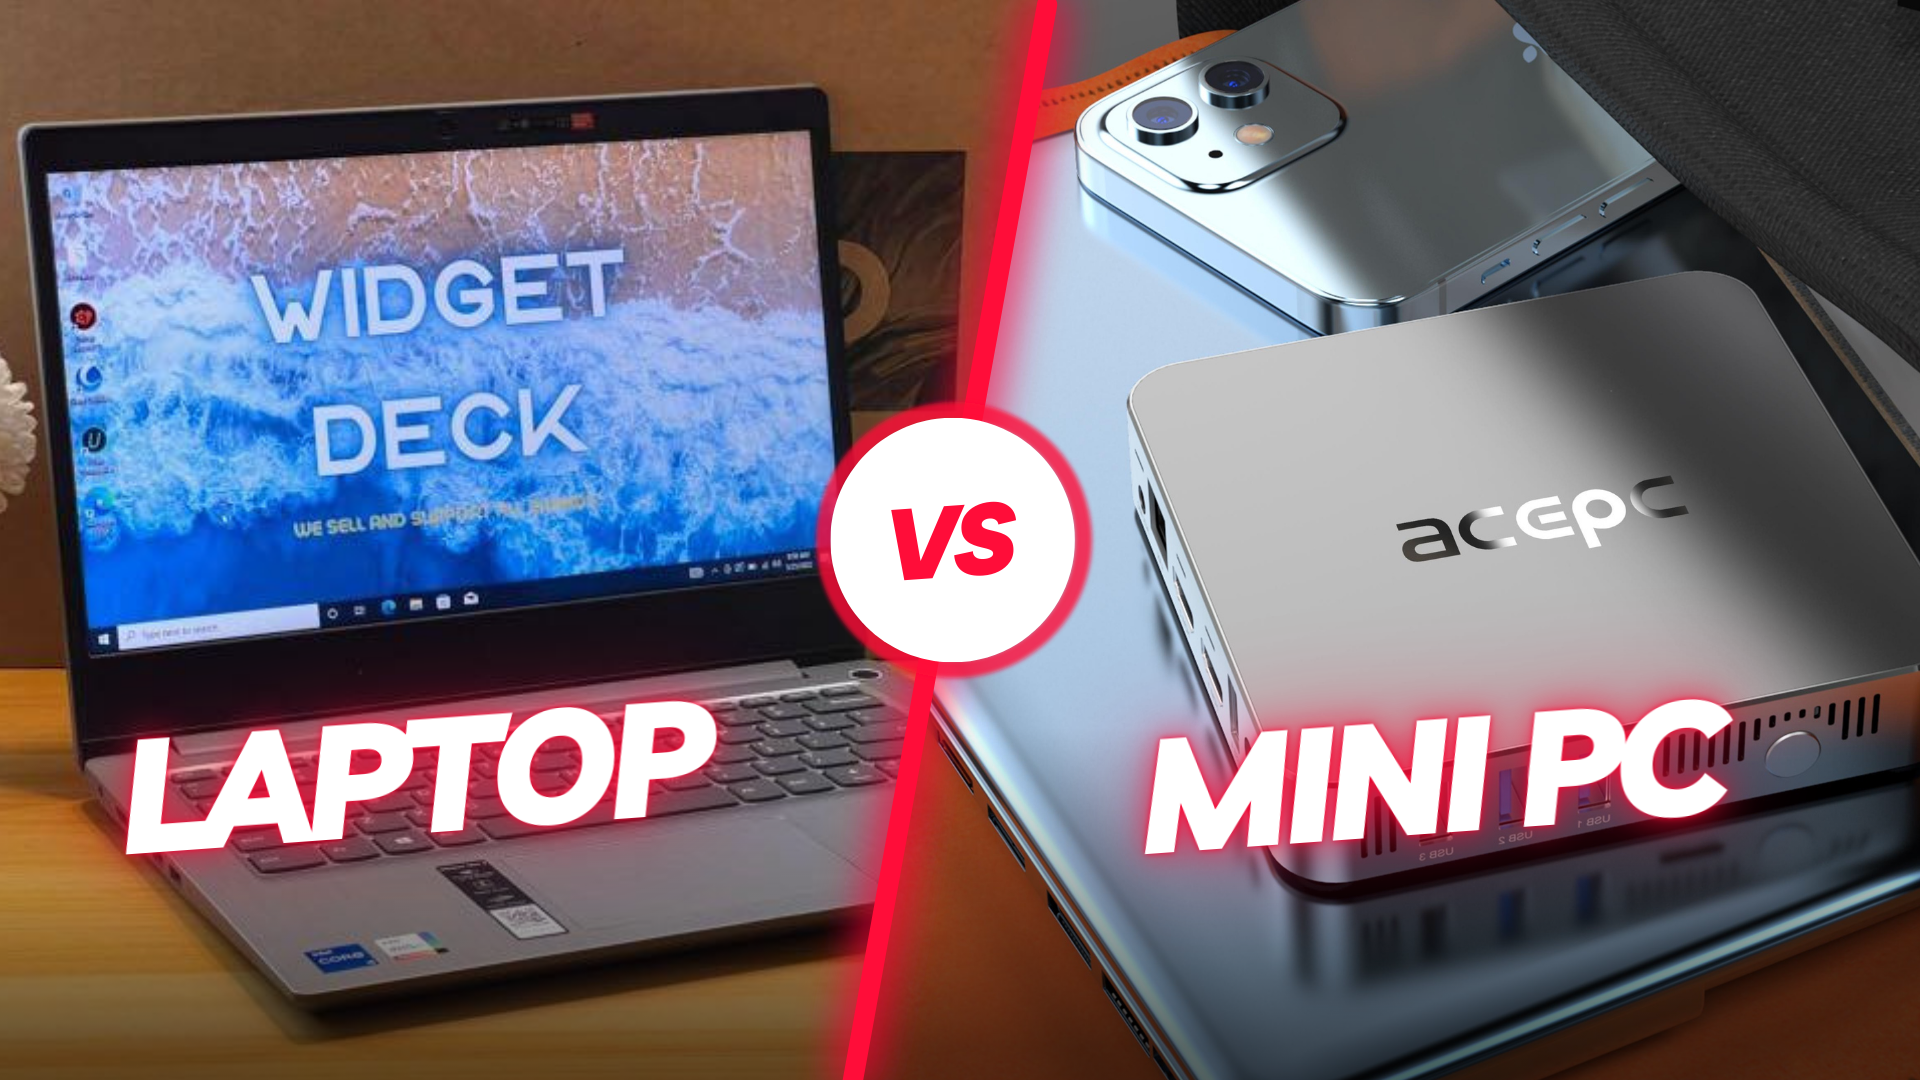 Laptop or mini PC: which is better?